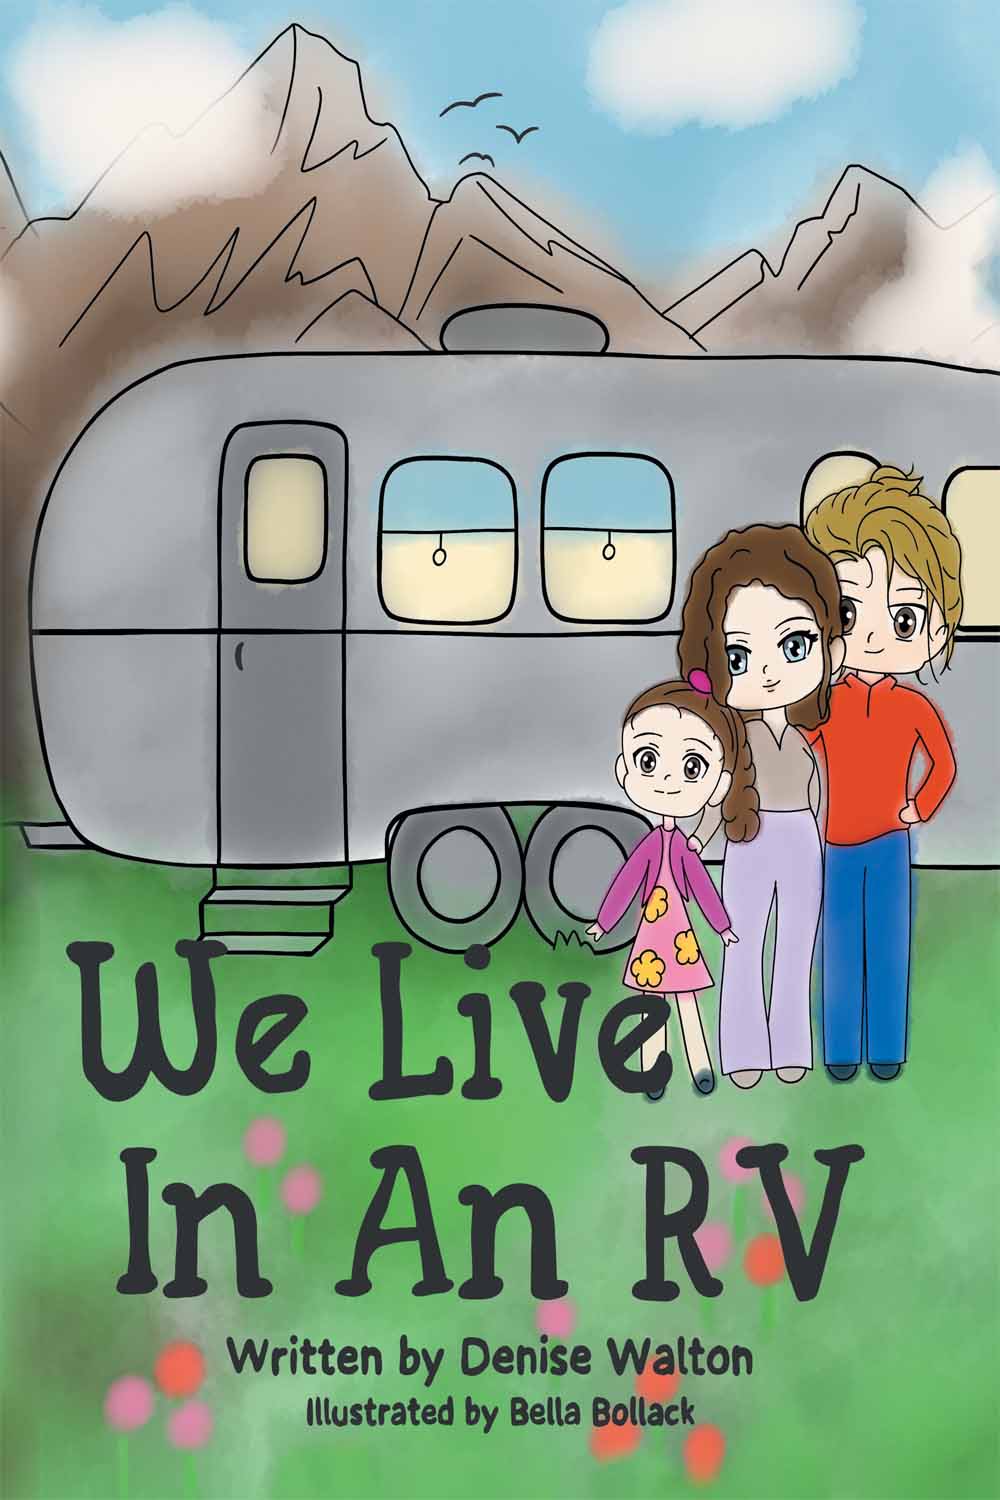 We Live In An RV by Denise Walton